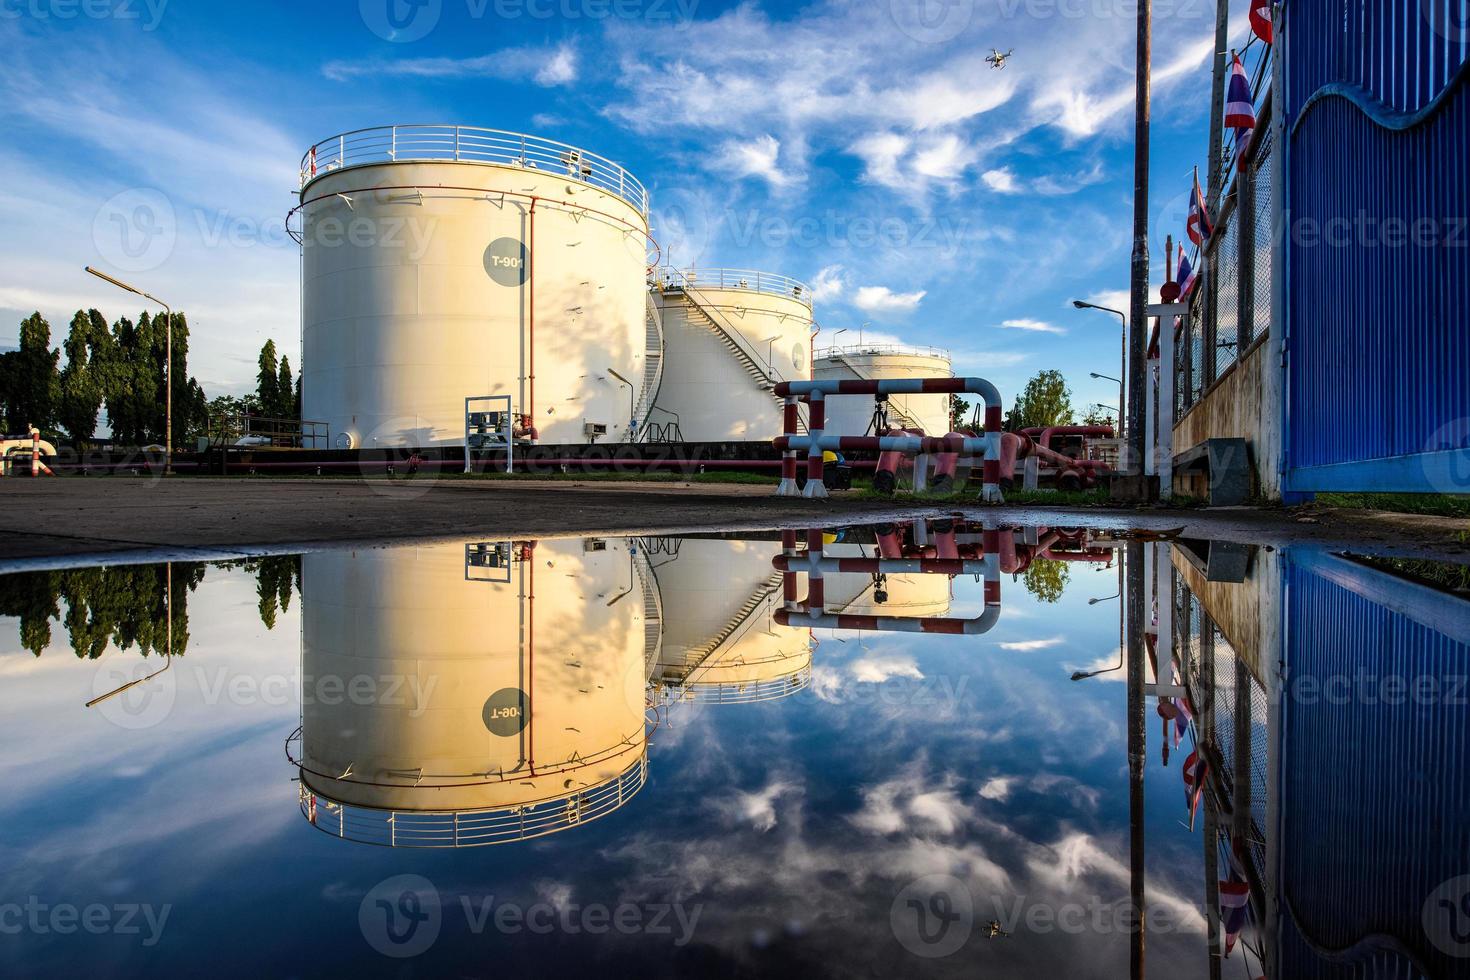 Large industrial oil tank reflecting water in the refinery base industrial plant photo